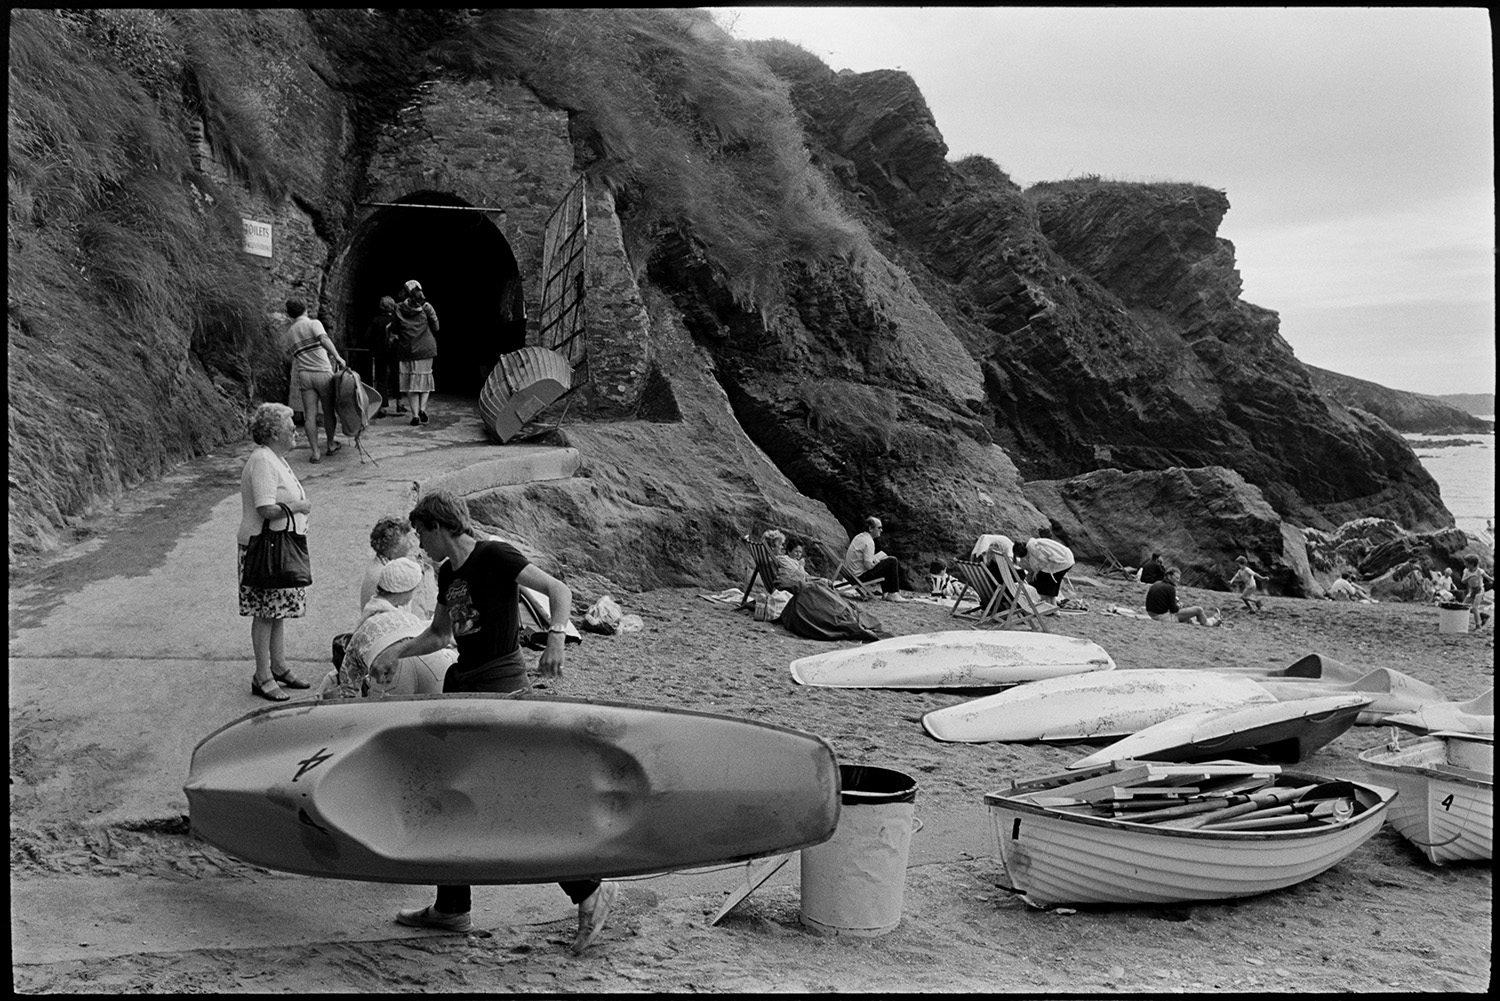 Entrance to tunnel and rocky beach with shop. People climbing on rocks. Boats. 
[People on Ilfracombe beach. Some are sat in deckchairs next to canoes and a rowing boat with oars on the beach. A man is carrying a small boat up a concrete path to a tunnel cut through the cliff to the beach.]